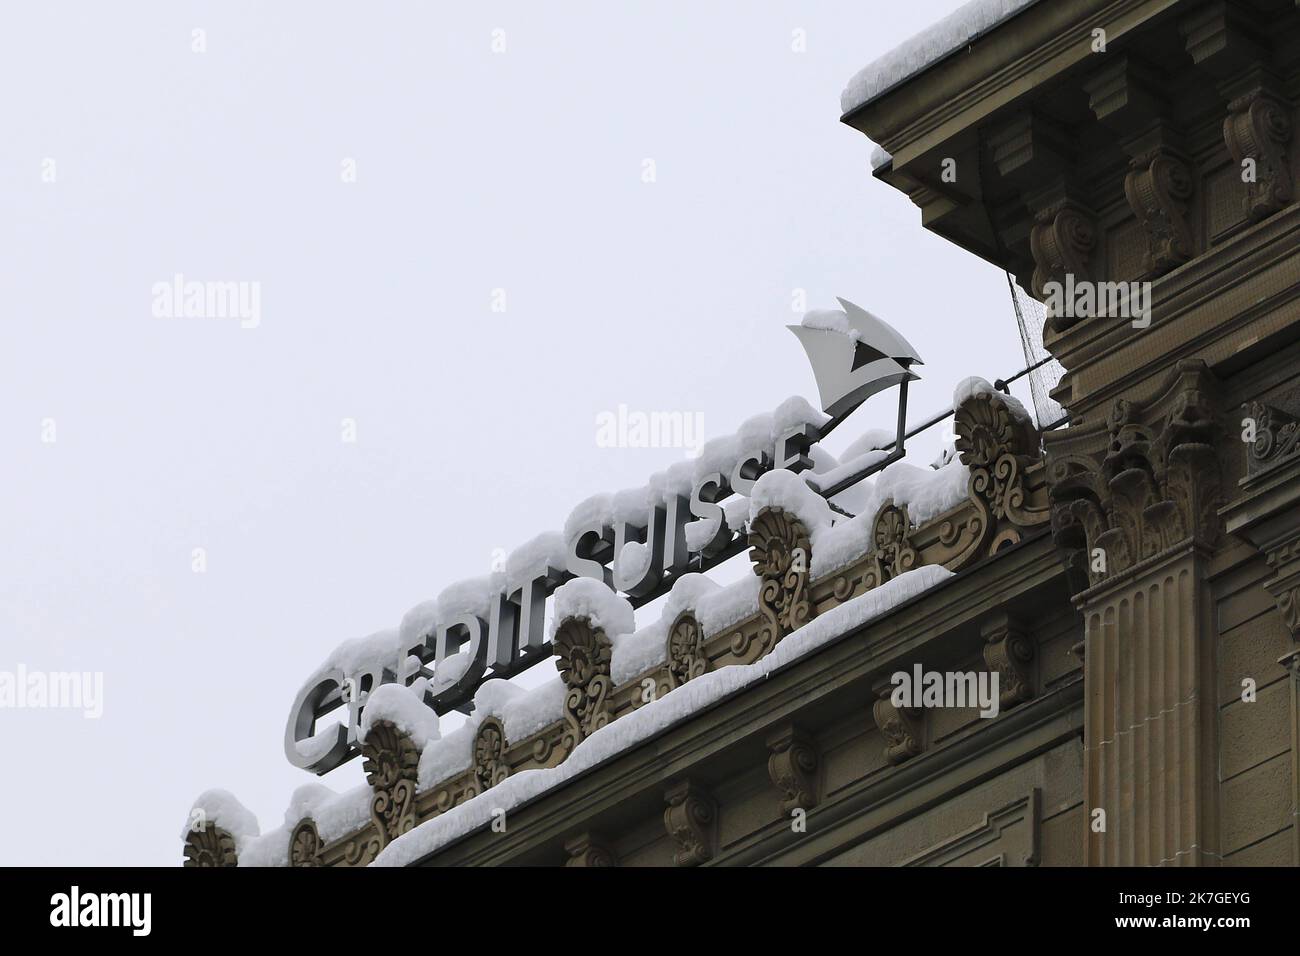 ©Francois Glories/MAXPPP - 02/08/2020 A data leak has hit Credit Suisse hard. The bank has allegedly been accepting criminals as clients for years. The Headquarters of the ' Credit Suisse ' on Paradeplatz in Zürich, Switzerland. February 2021. Stock Photo